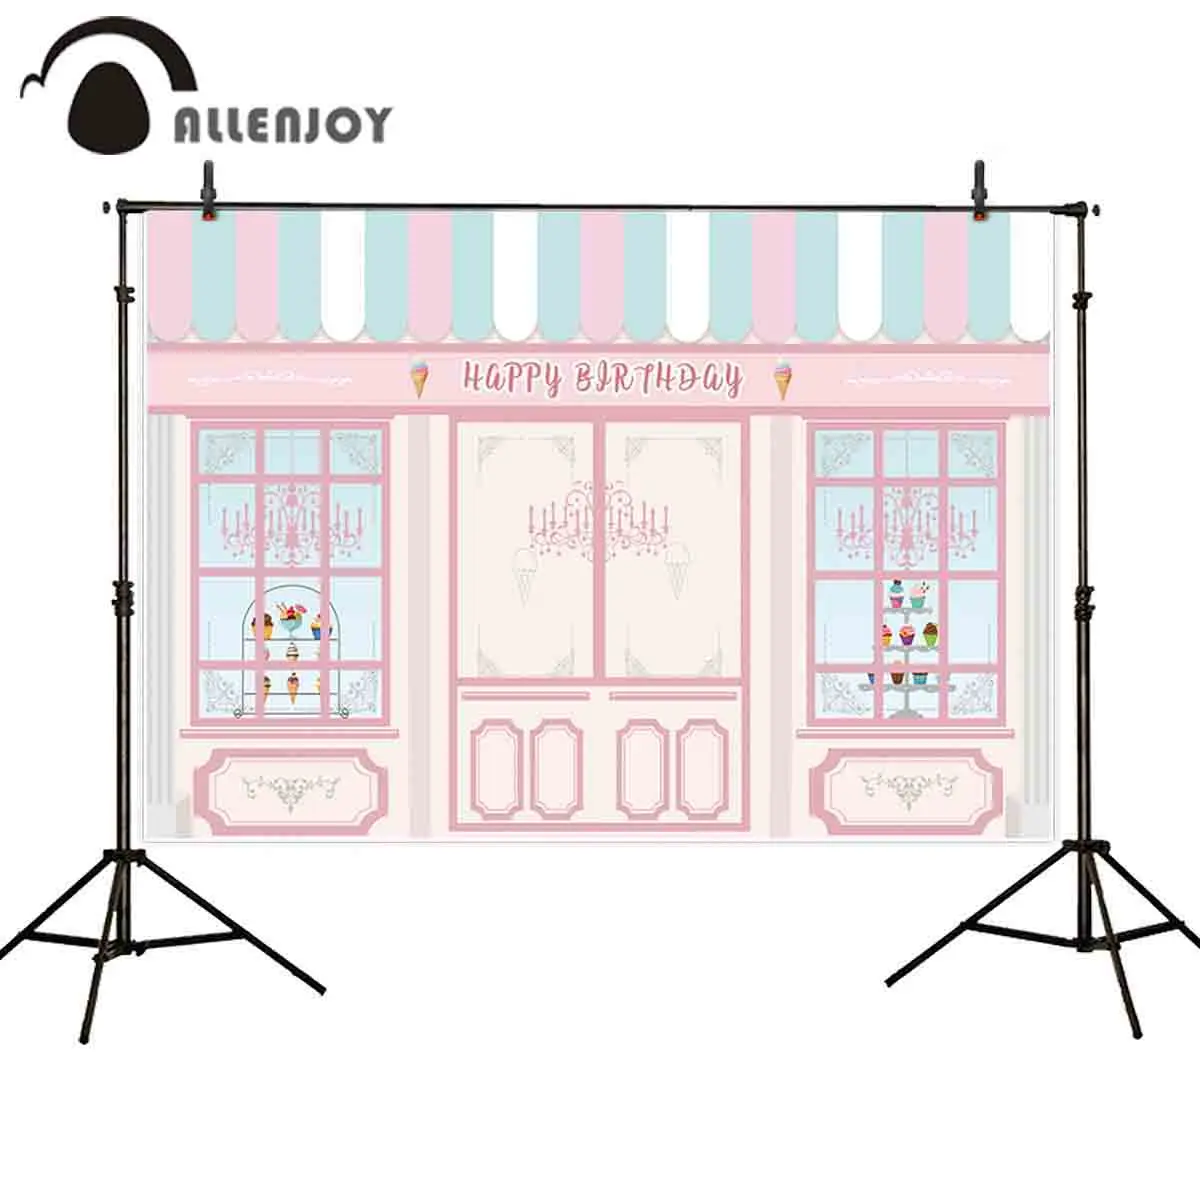 

Allenjoy photography backdrops pink Ice cream shop birthday party decor background photo studio photocall photophone shoot prop